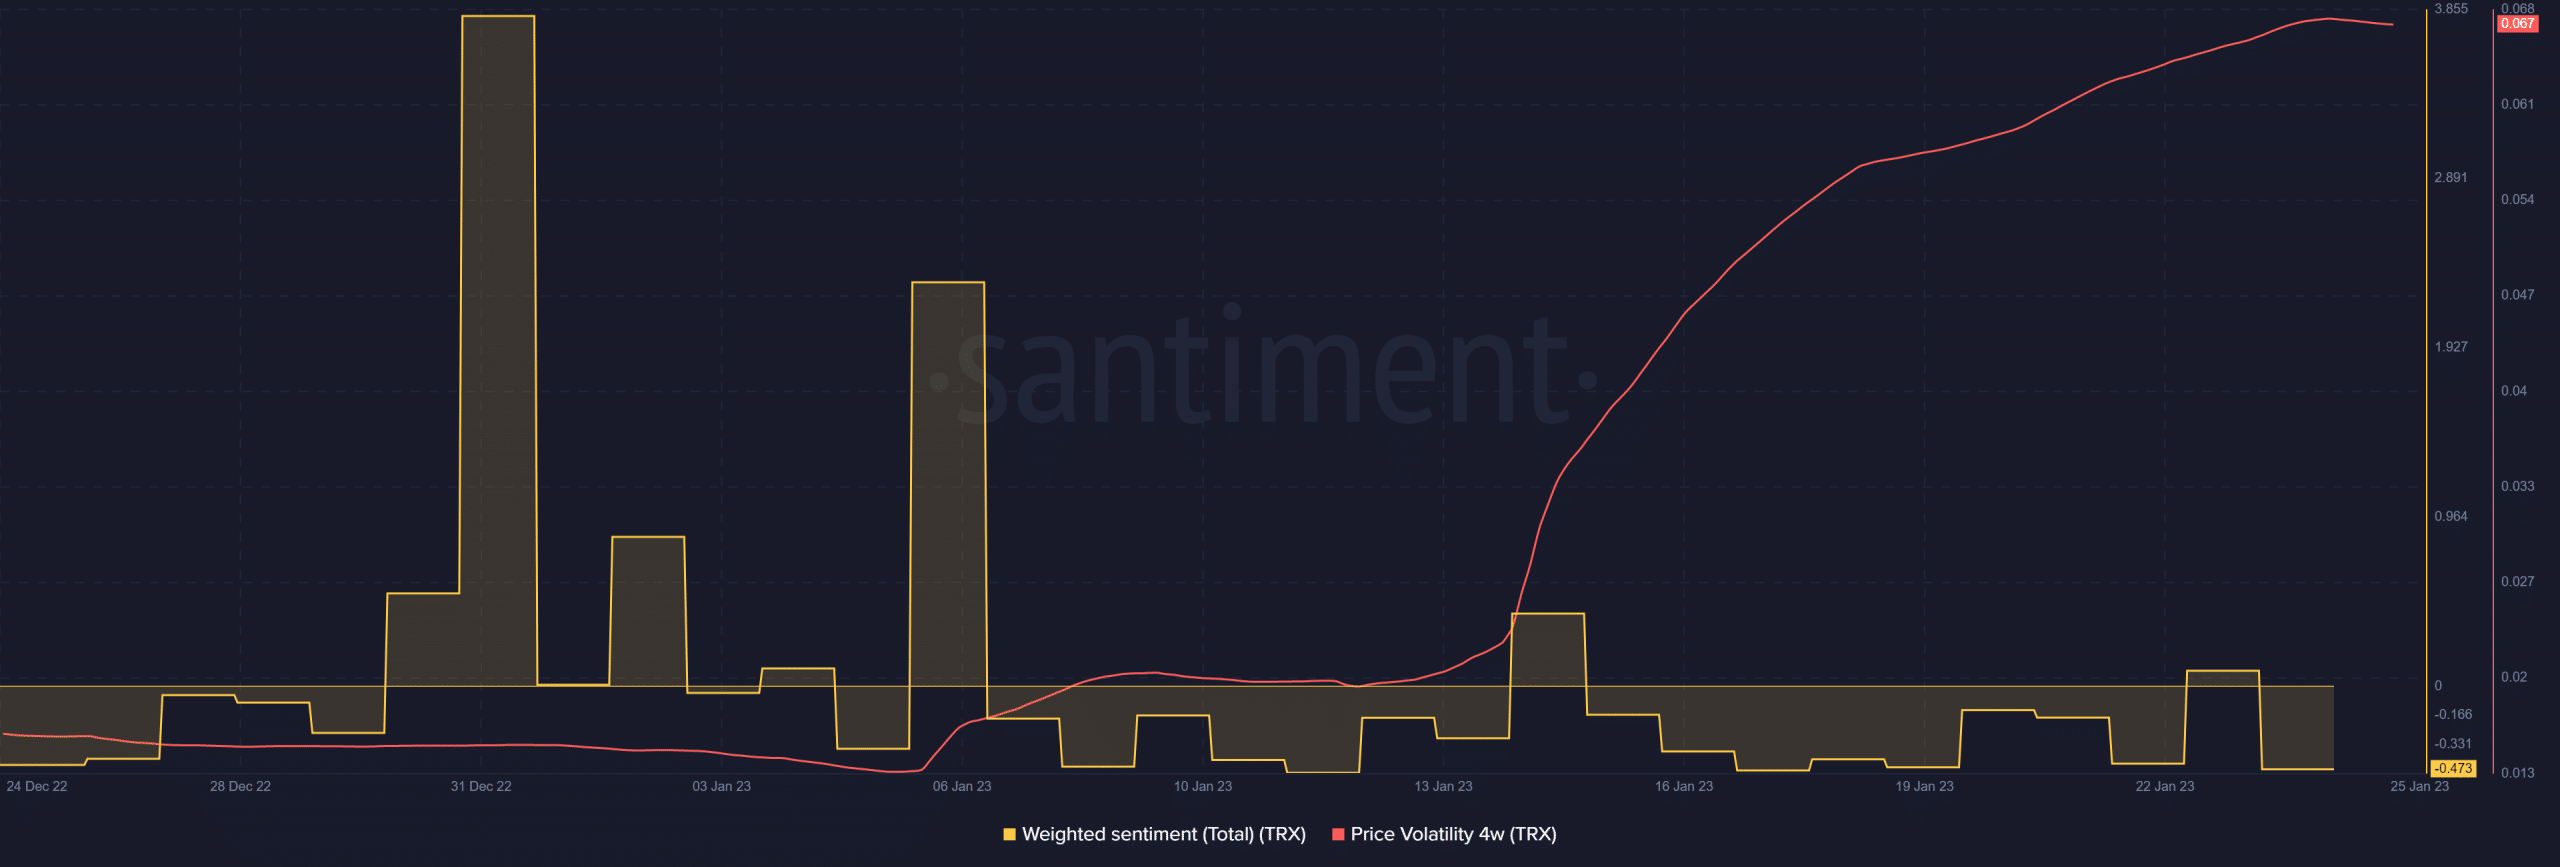 Tron price volatility and weighted sentiment